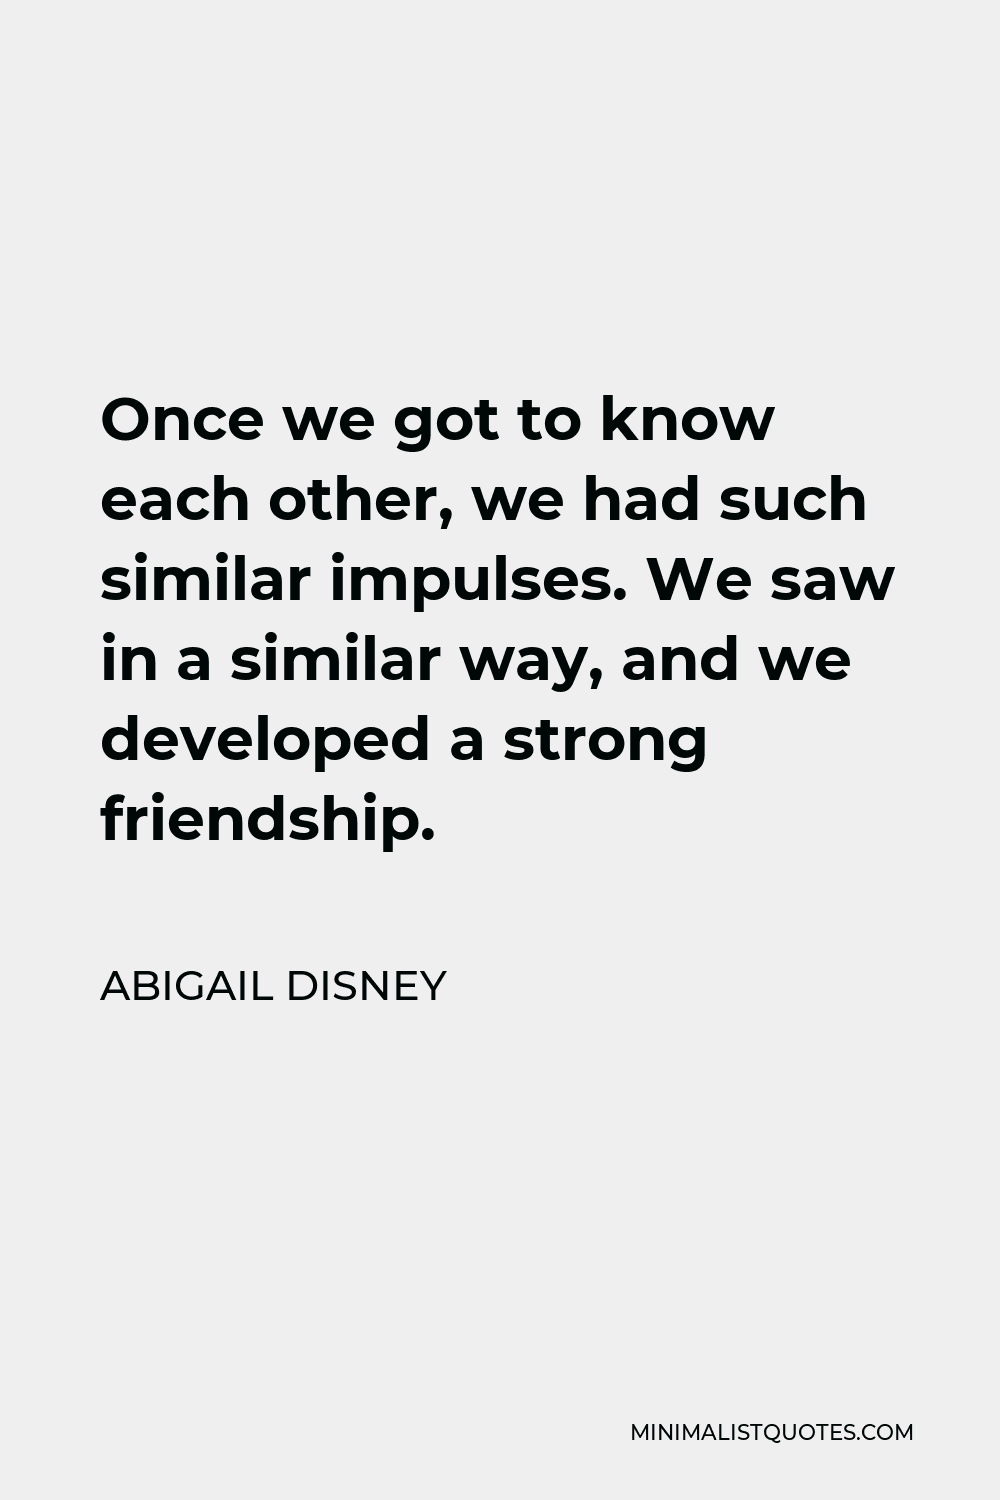 Abigail Disney Quote - Once we got to know each other, we had such similar impulses. We saw in a similar way, and we developed a strong friendship.